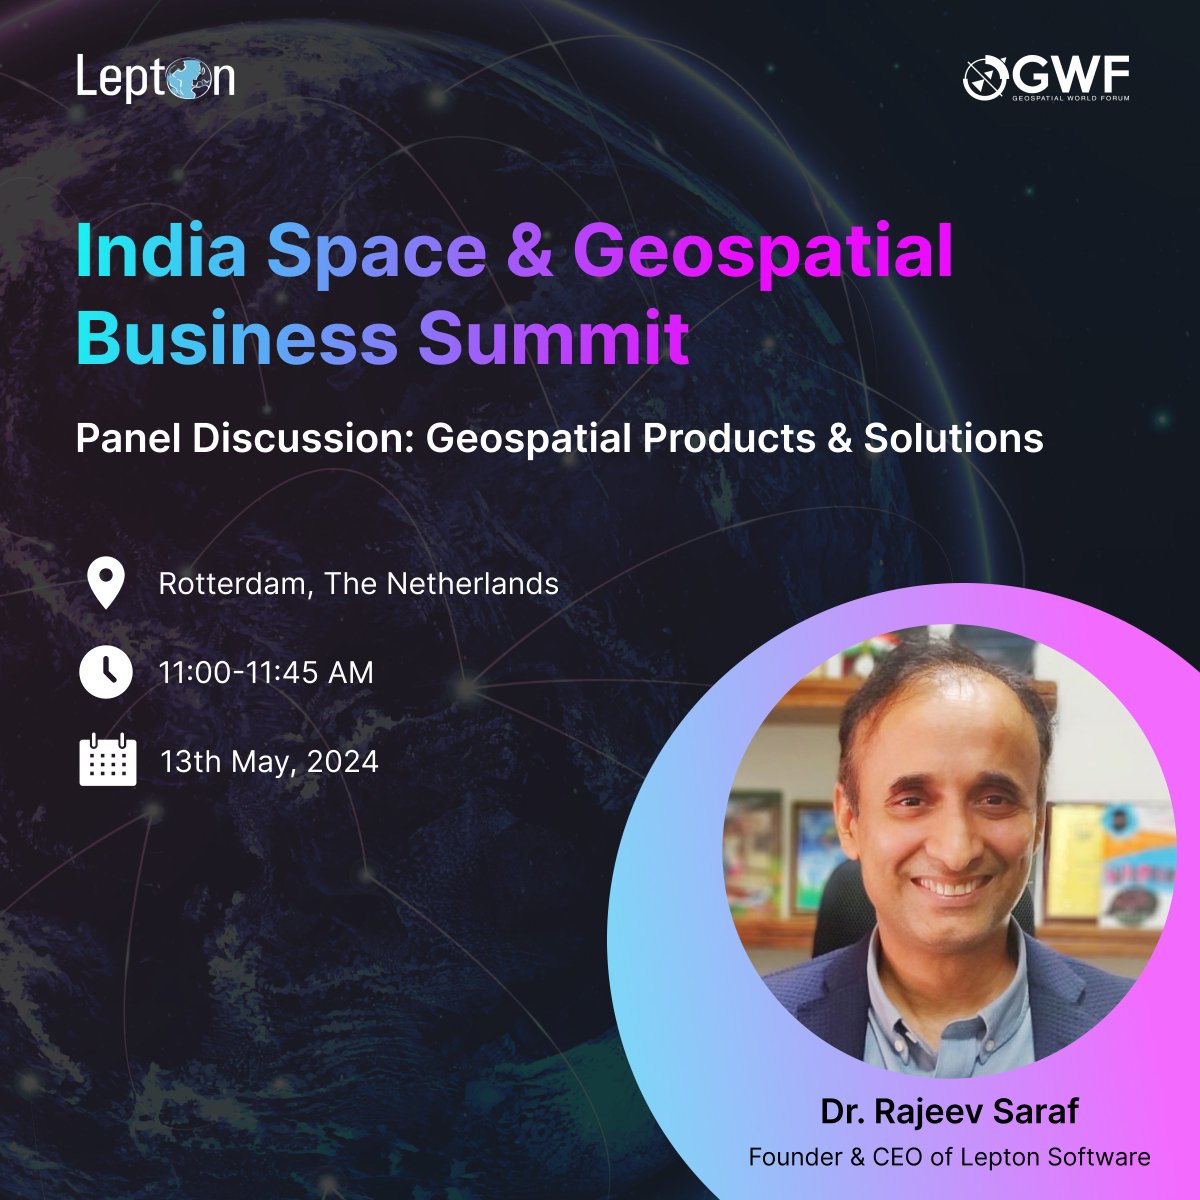 Dr. @rsaraf007, our CEO, will join as a panelist at the upcoming India-Europe Space & Geospatial Business Summit hosted by @geoworldmedia.

Stay connected for further updates. 👏

#GWF2024 #LeptonSoftware #GeospatialIntelligence #LeptonSoftware #GeospatialWorld